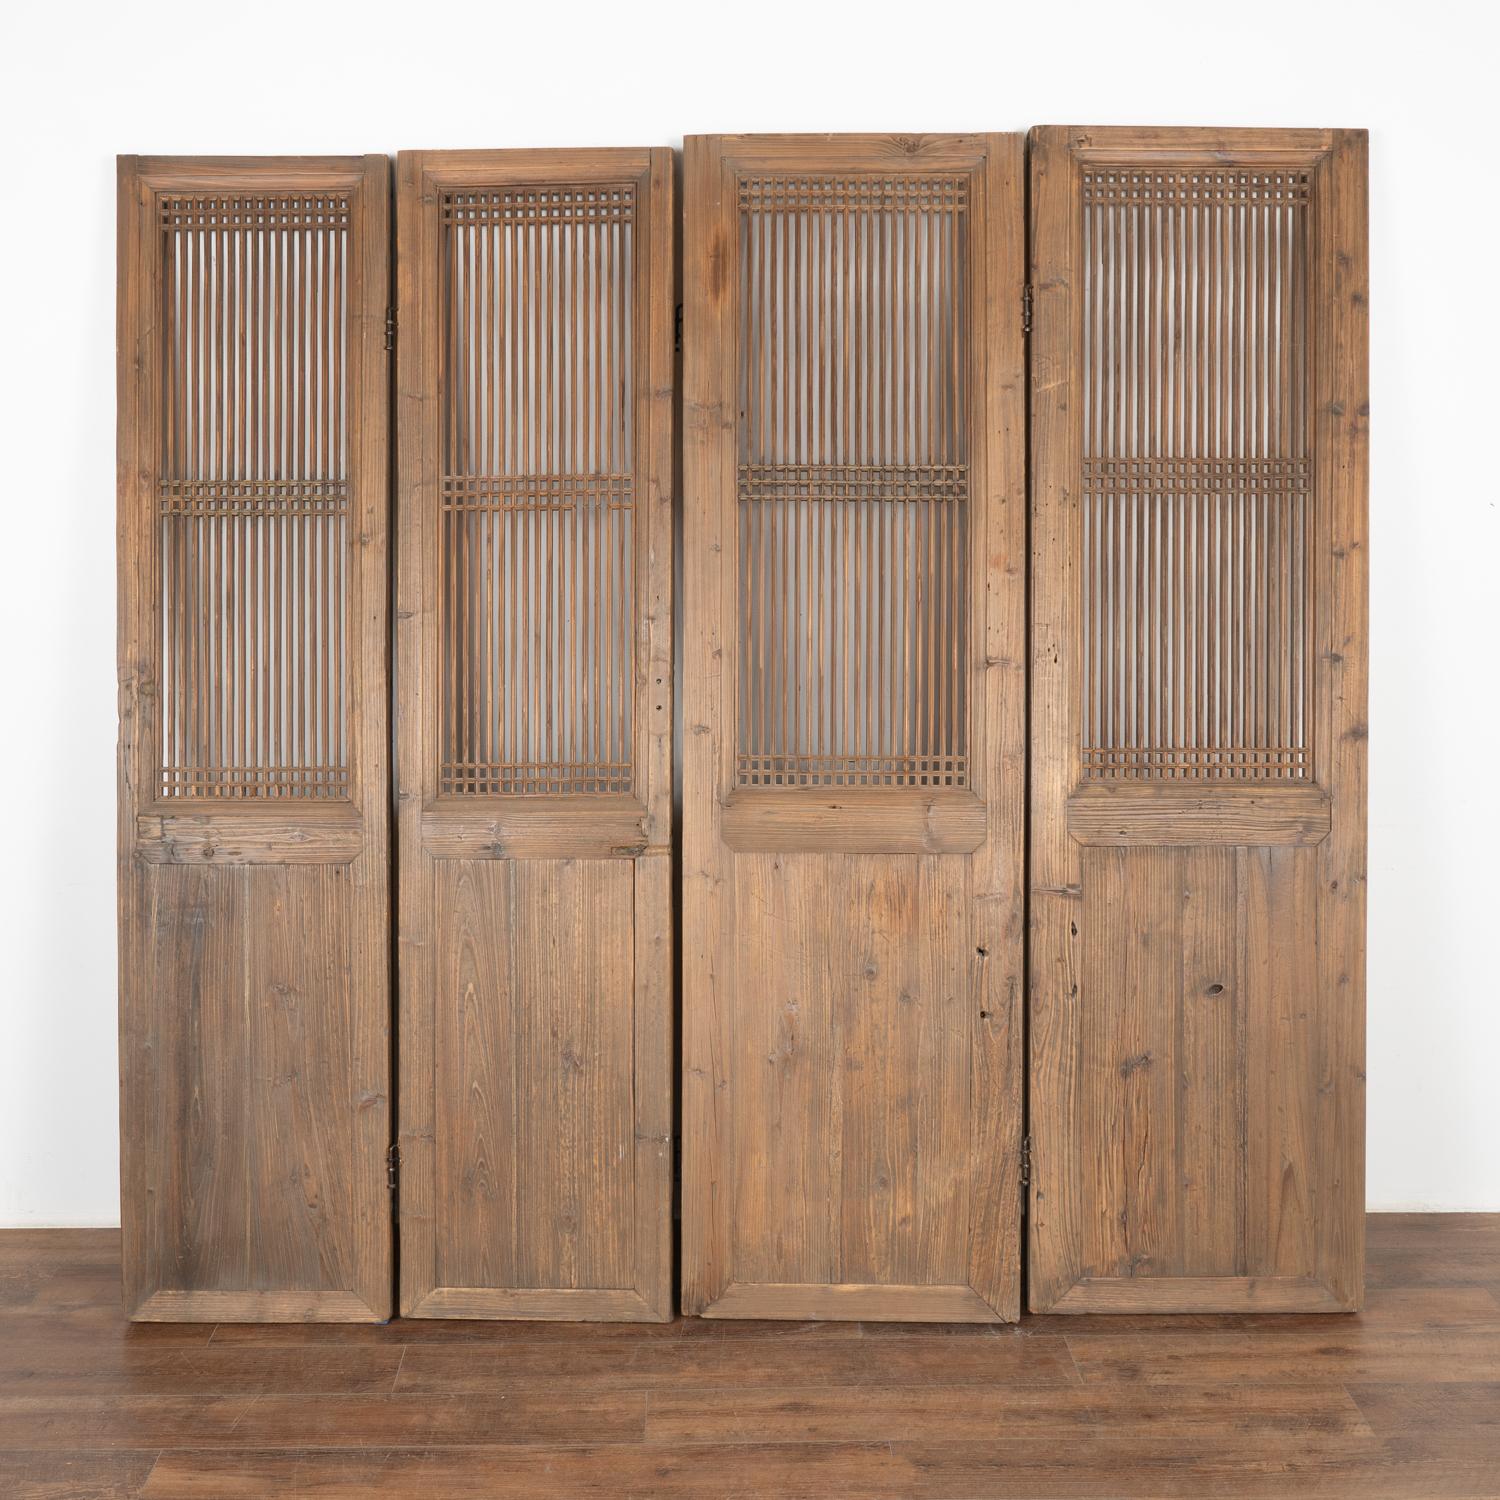 A set of four large natural elm wood interior folding screen panels with vertical fretwork that allows light to pass through the upper section.
Solid, stable and all hinges in place. Any scratches, cracks, dings, or age related separation are